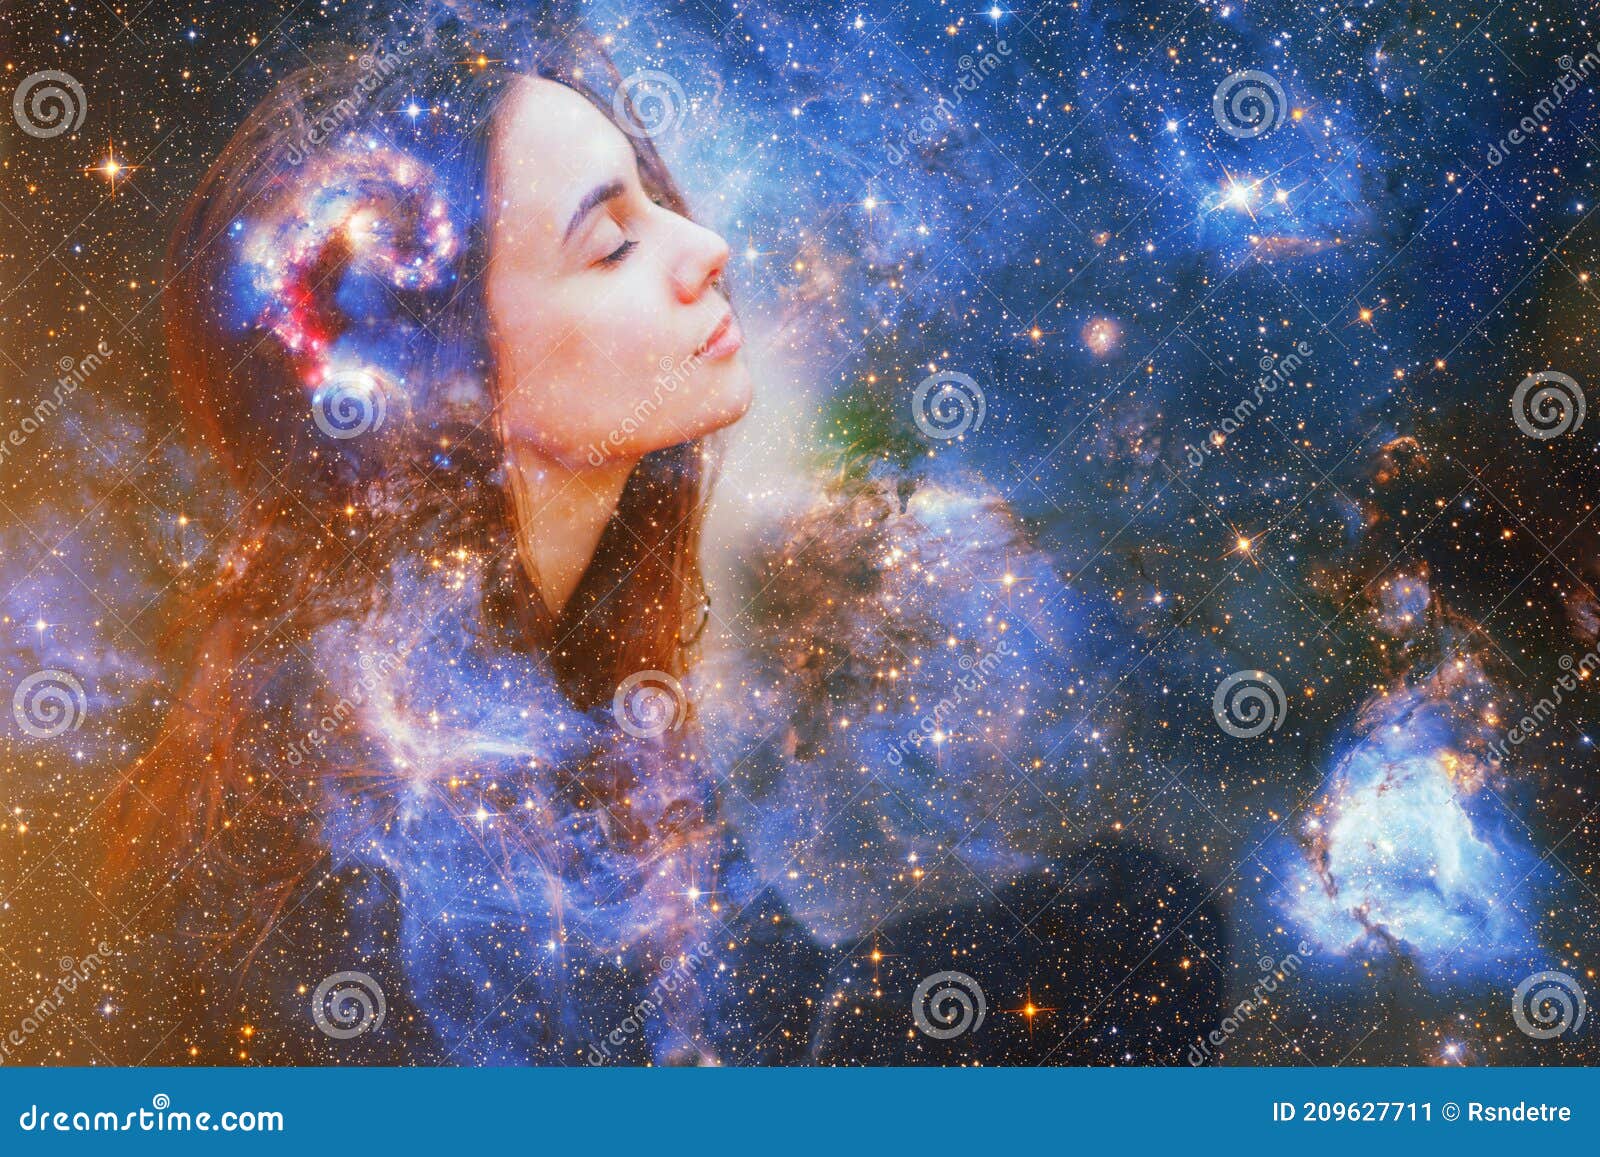 double exposure portrait of a young woman close eye face with galaxy space inside head. human inner peace, star light fire, life